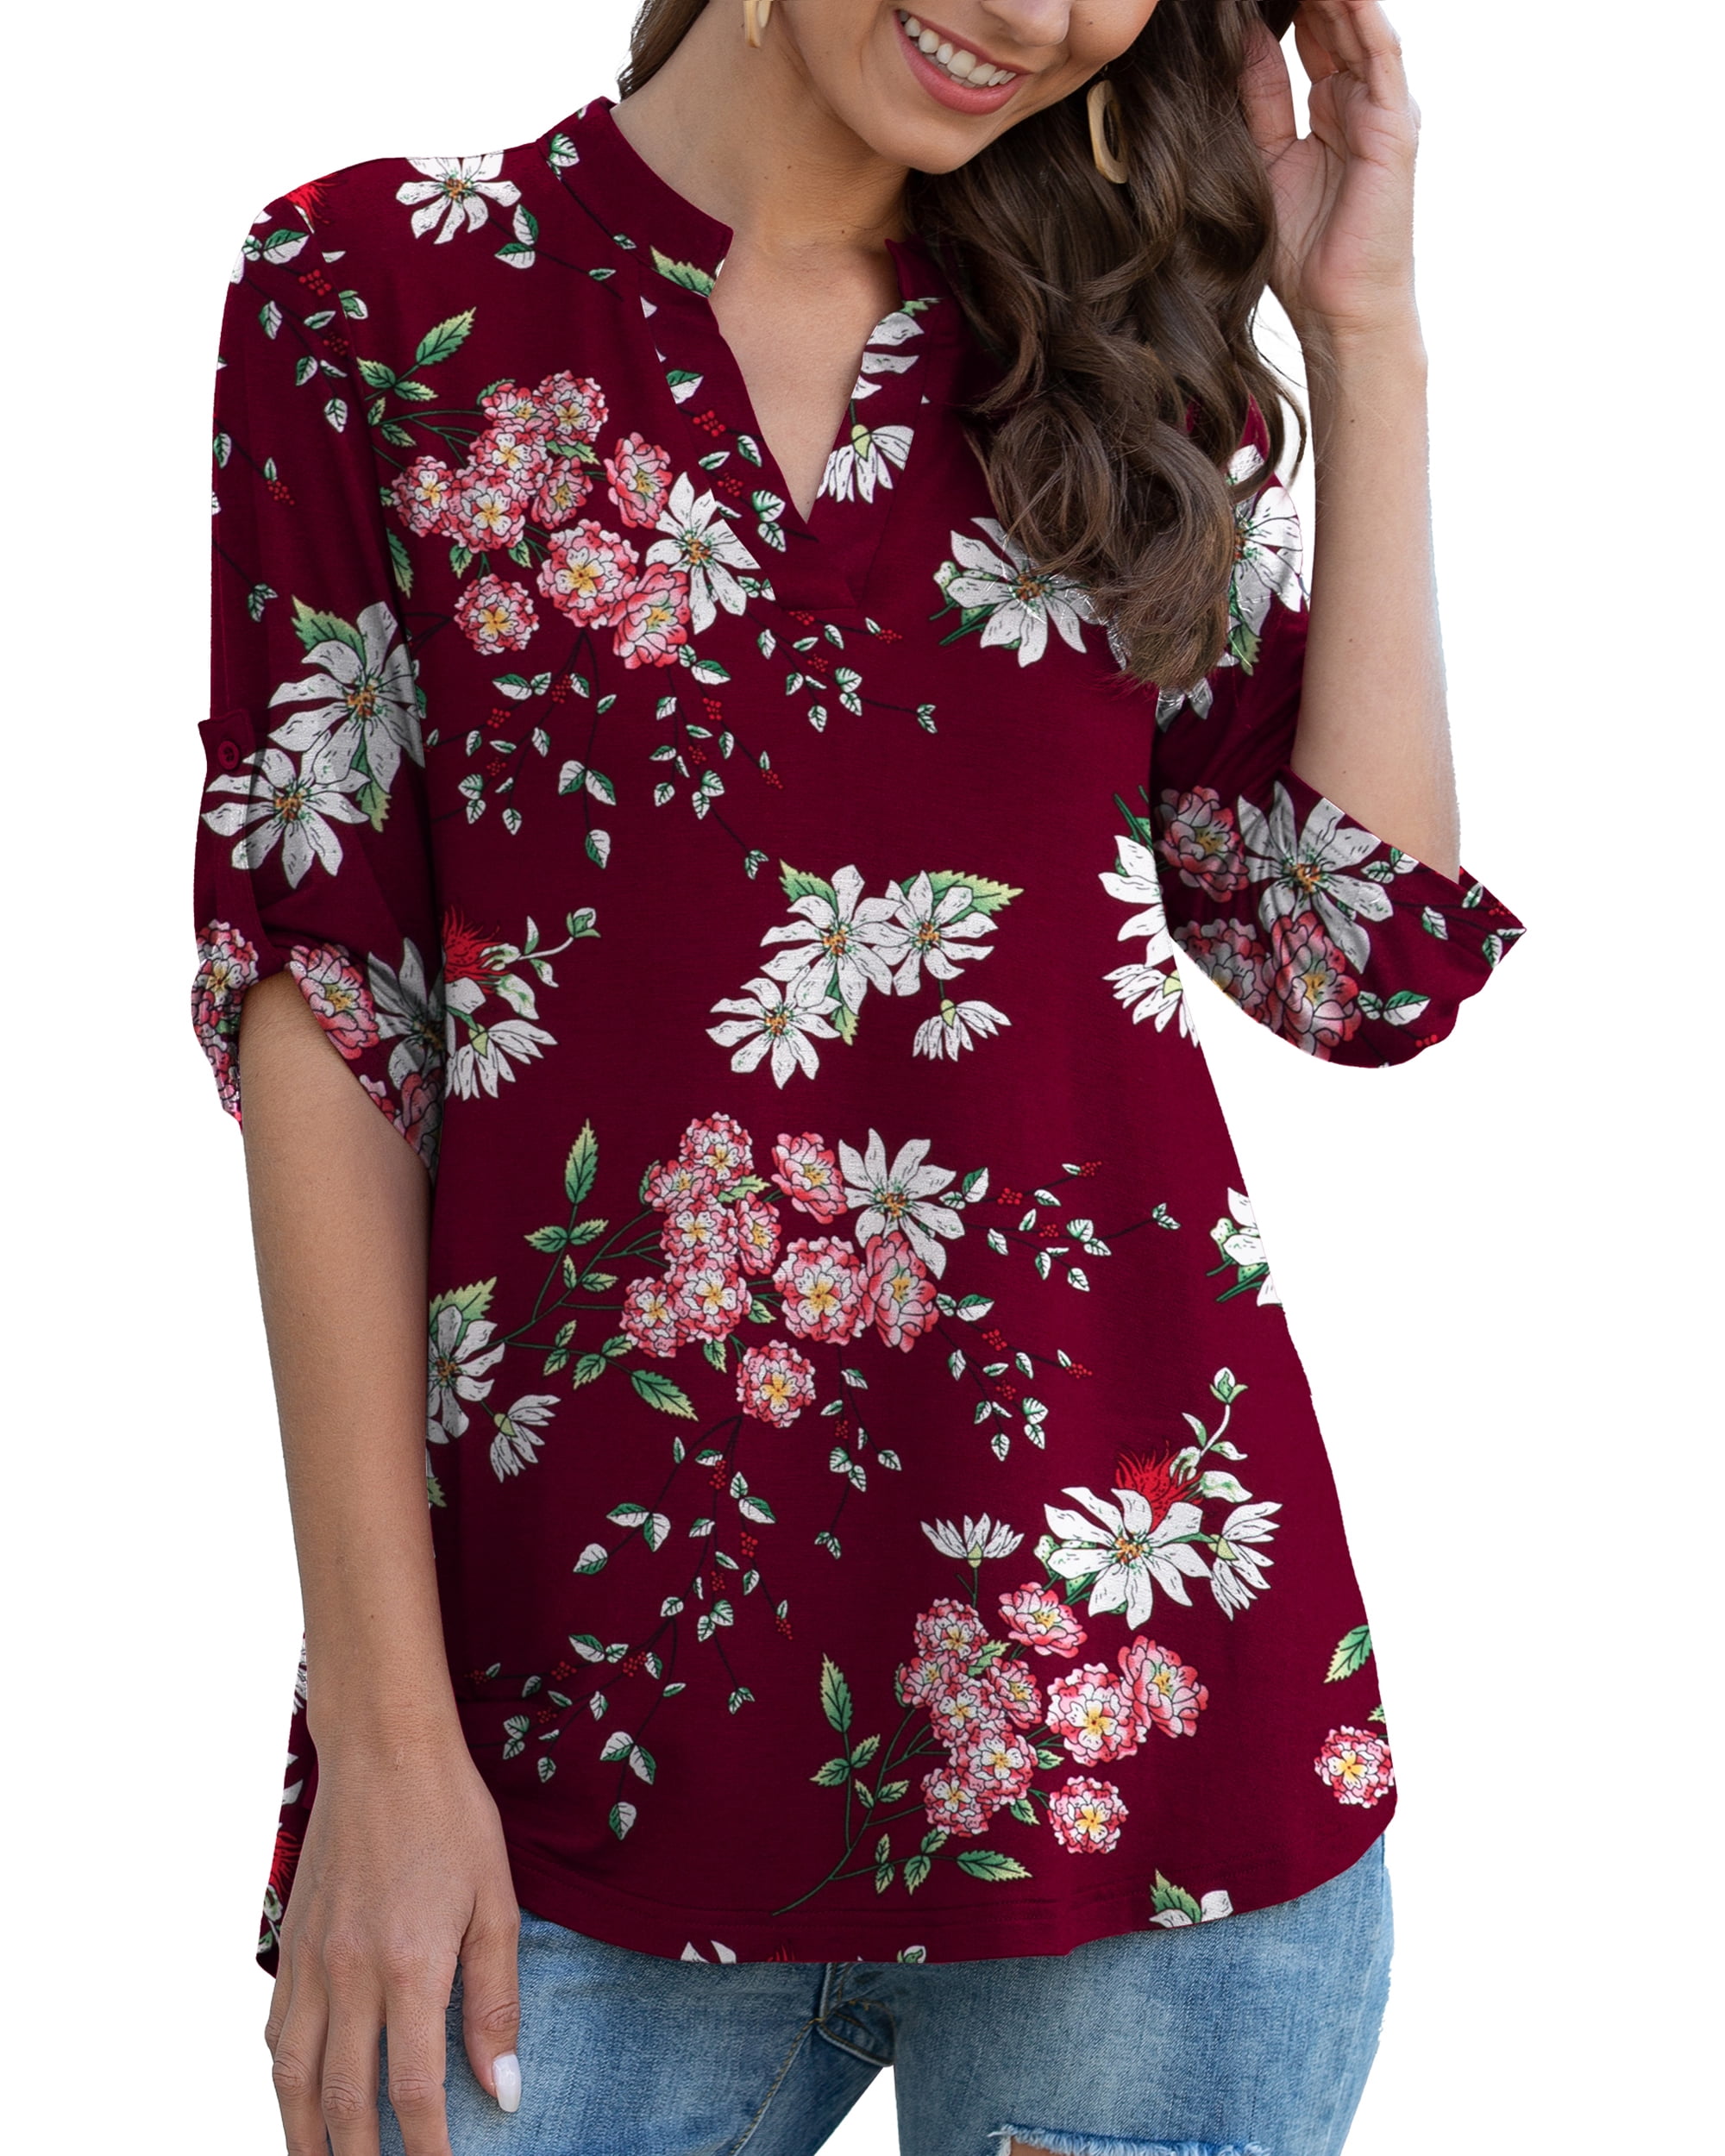 a.Jesdani Womens Plus Size Tunic Tops 3/4 Sleeve Casual Floral Henley ...